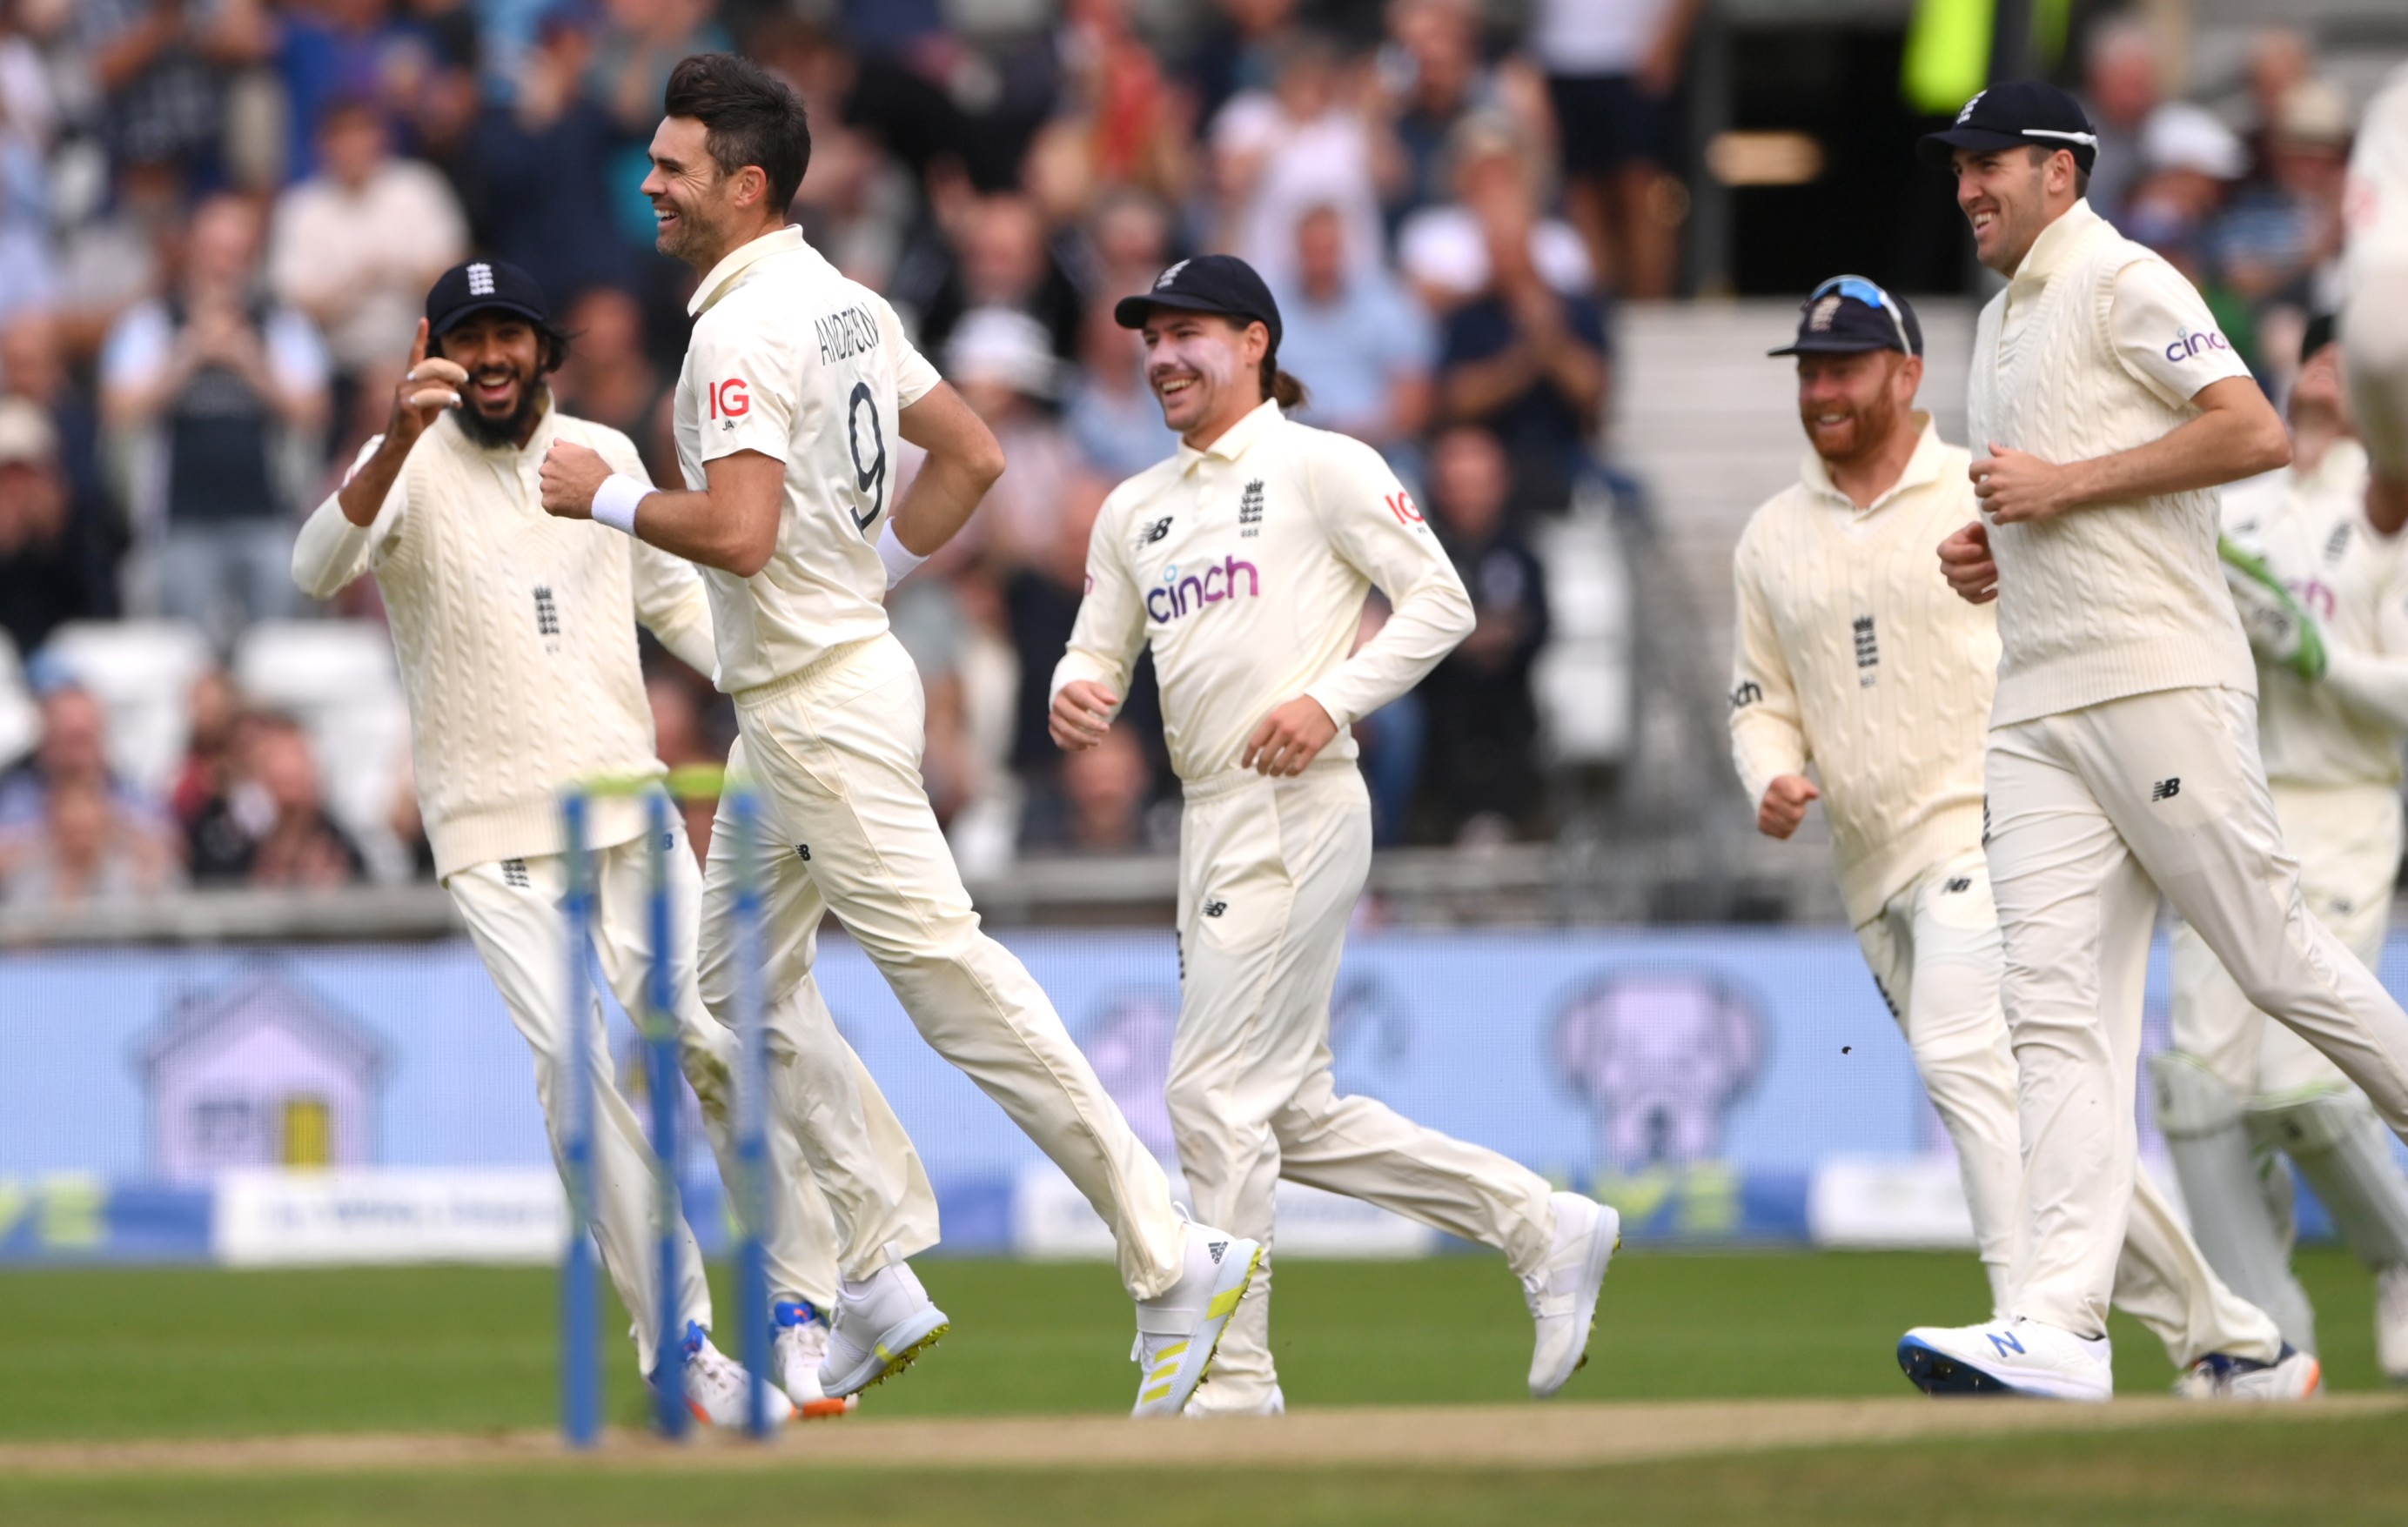 ENG vs IND | Headingley Day 1 Talking Points: The ageless James Anderson, India’s embarrassing collapse and England's refreshing start